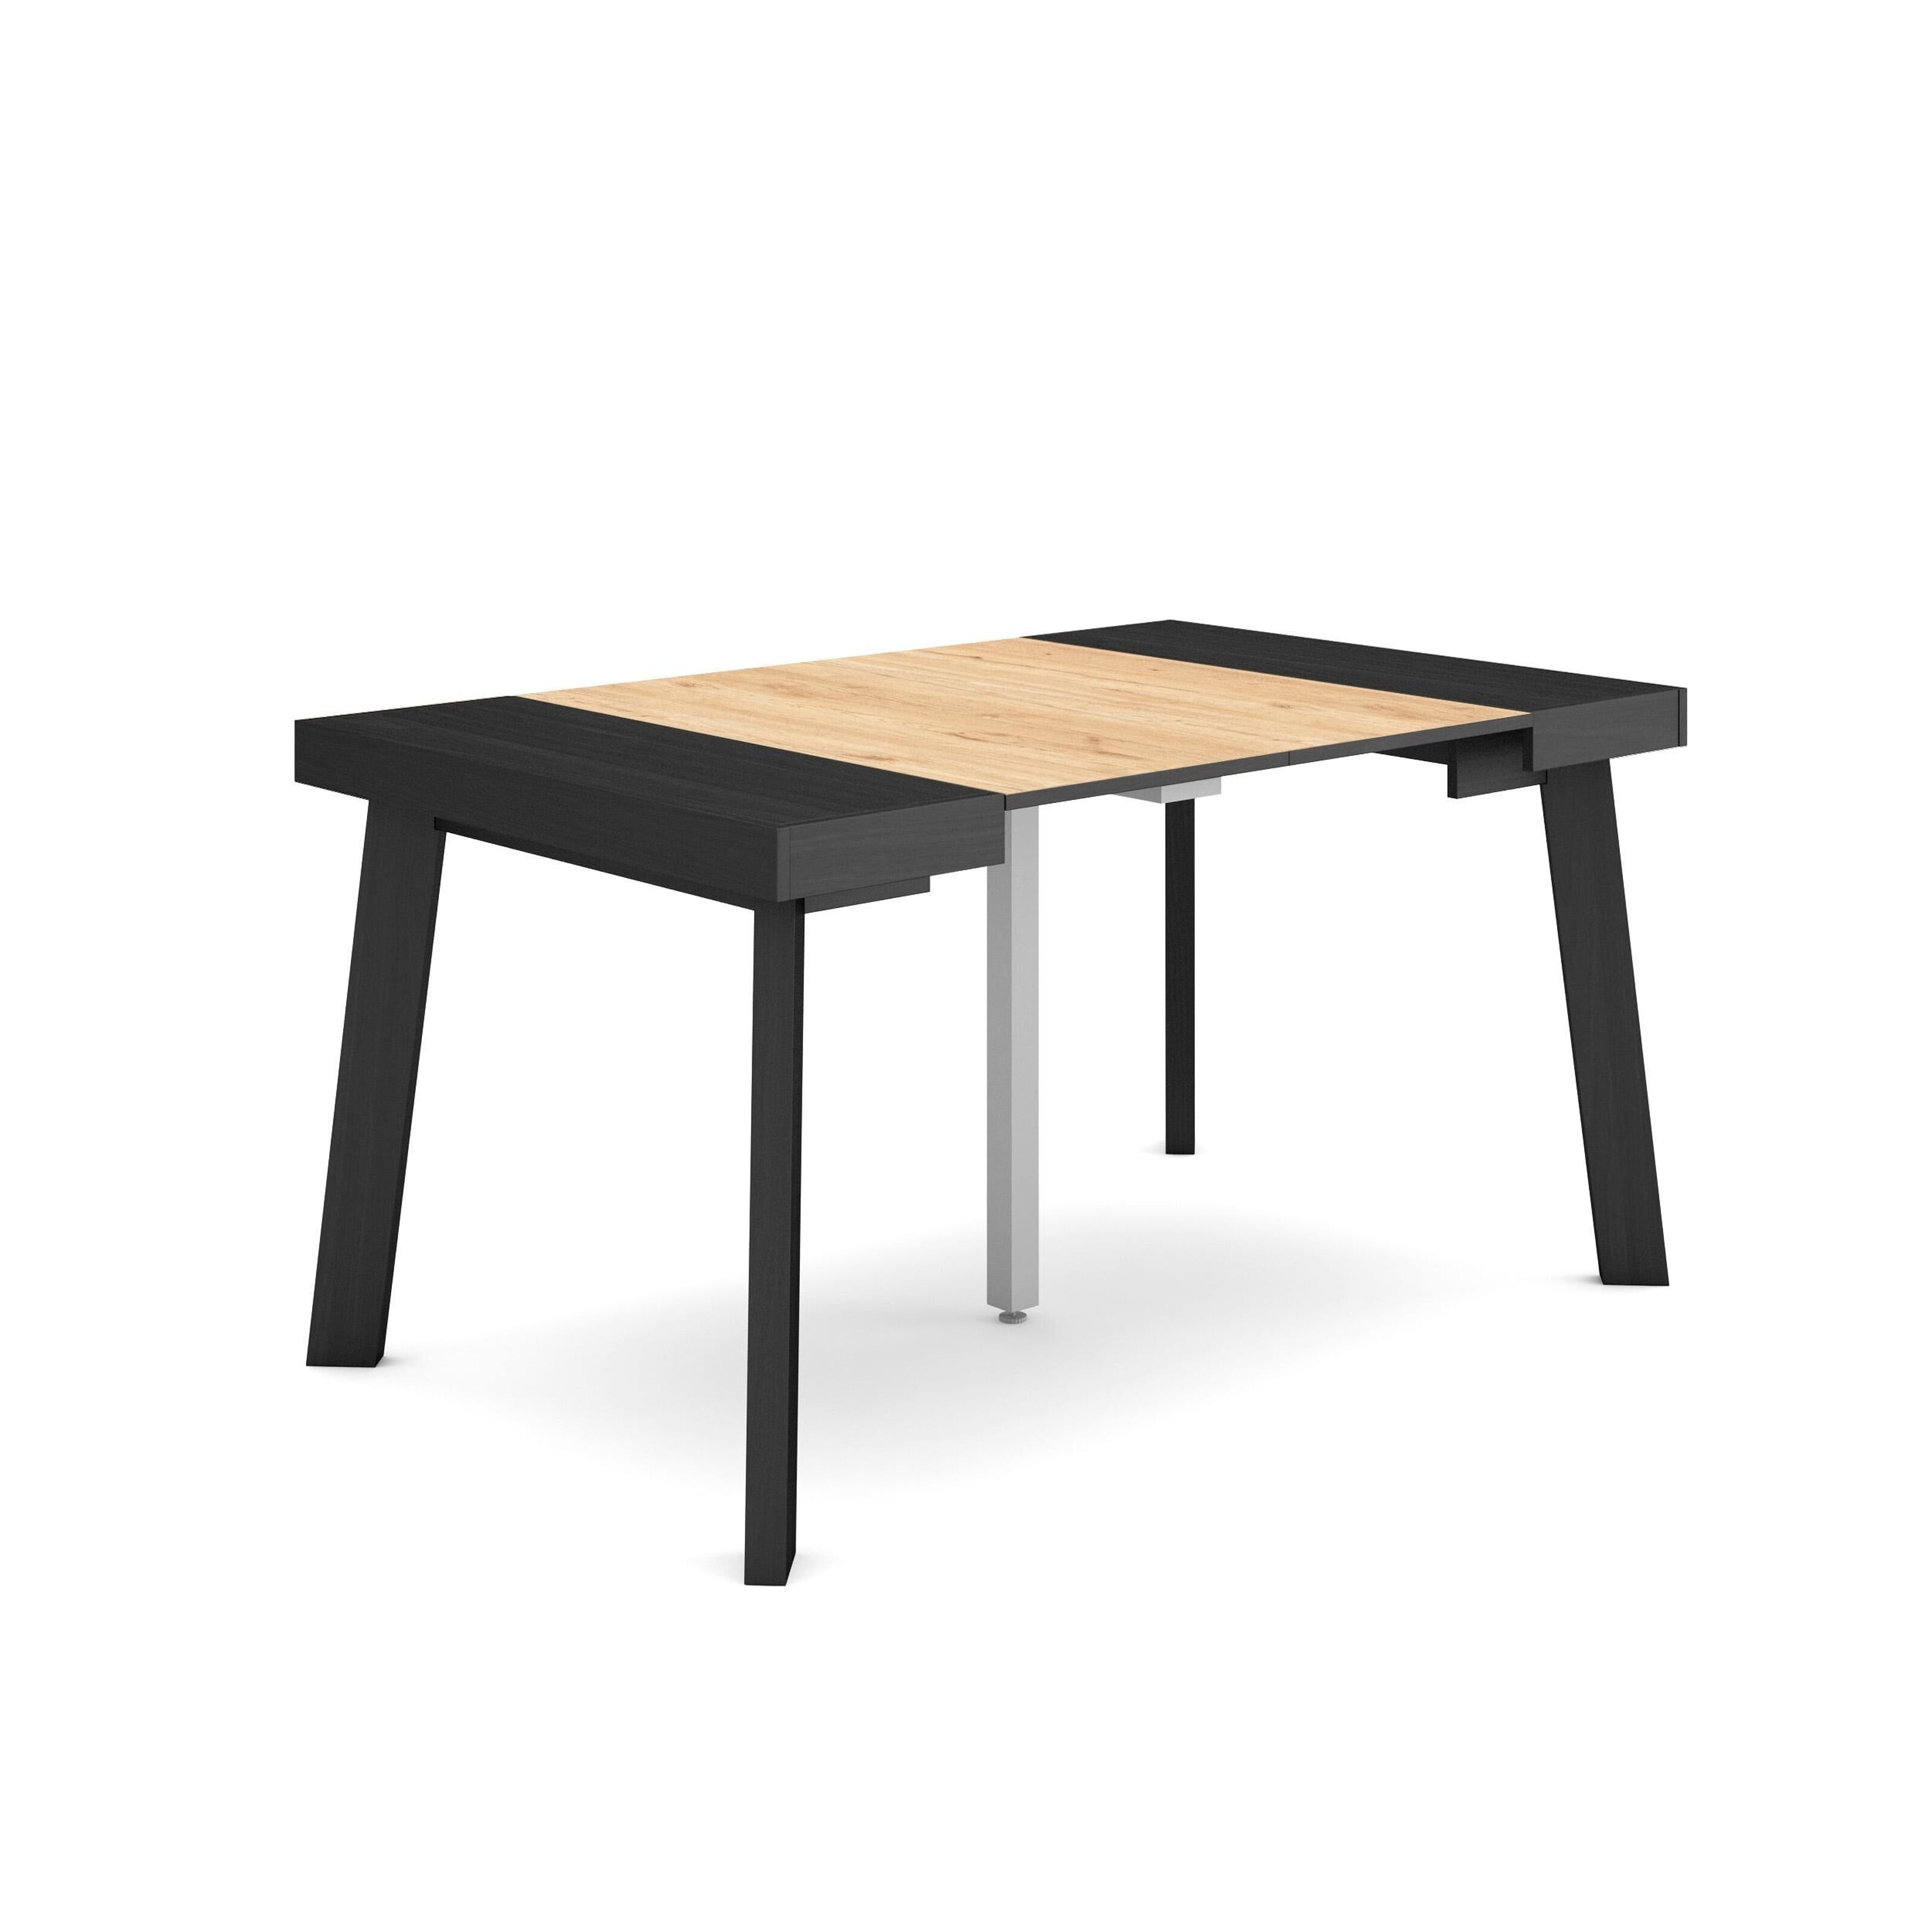 Extendable dining table by Skraut Home